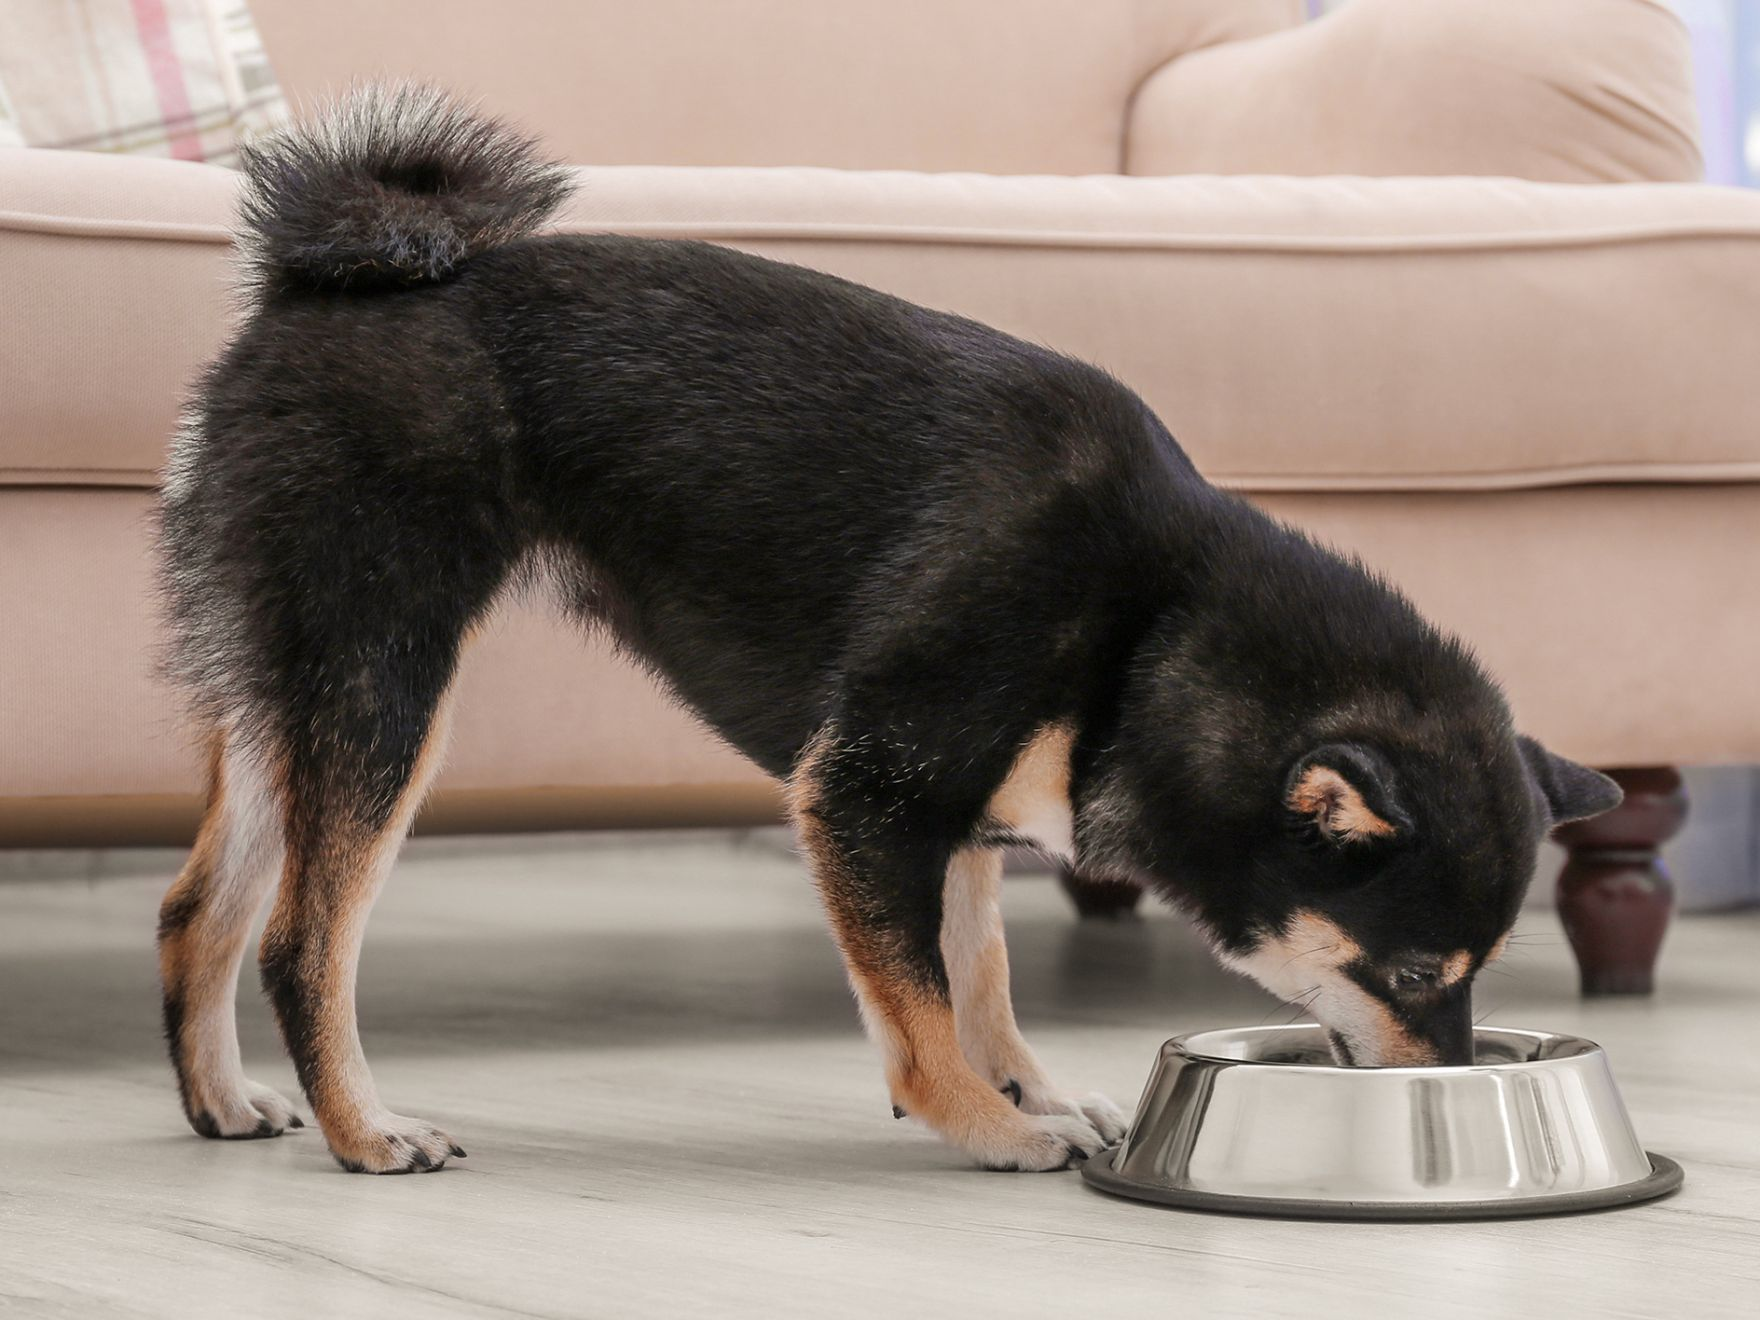 Spitz dog standing in a living room eating from a silver bowl